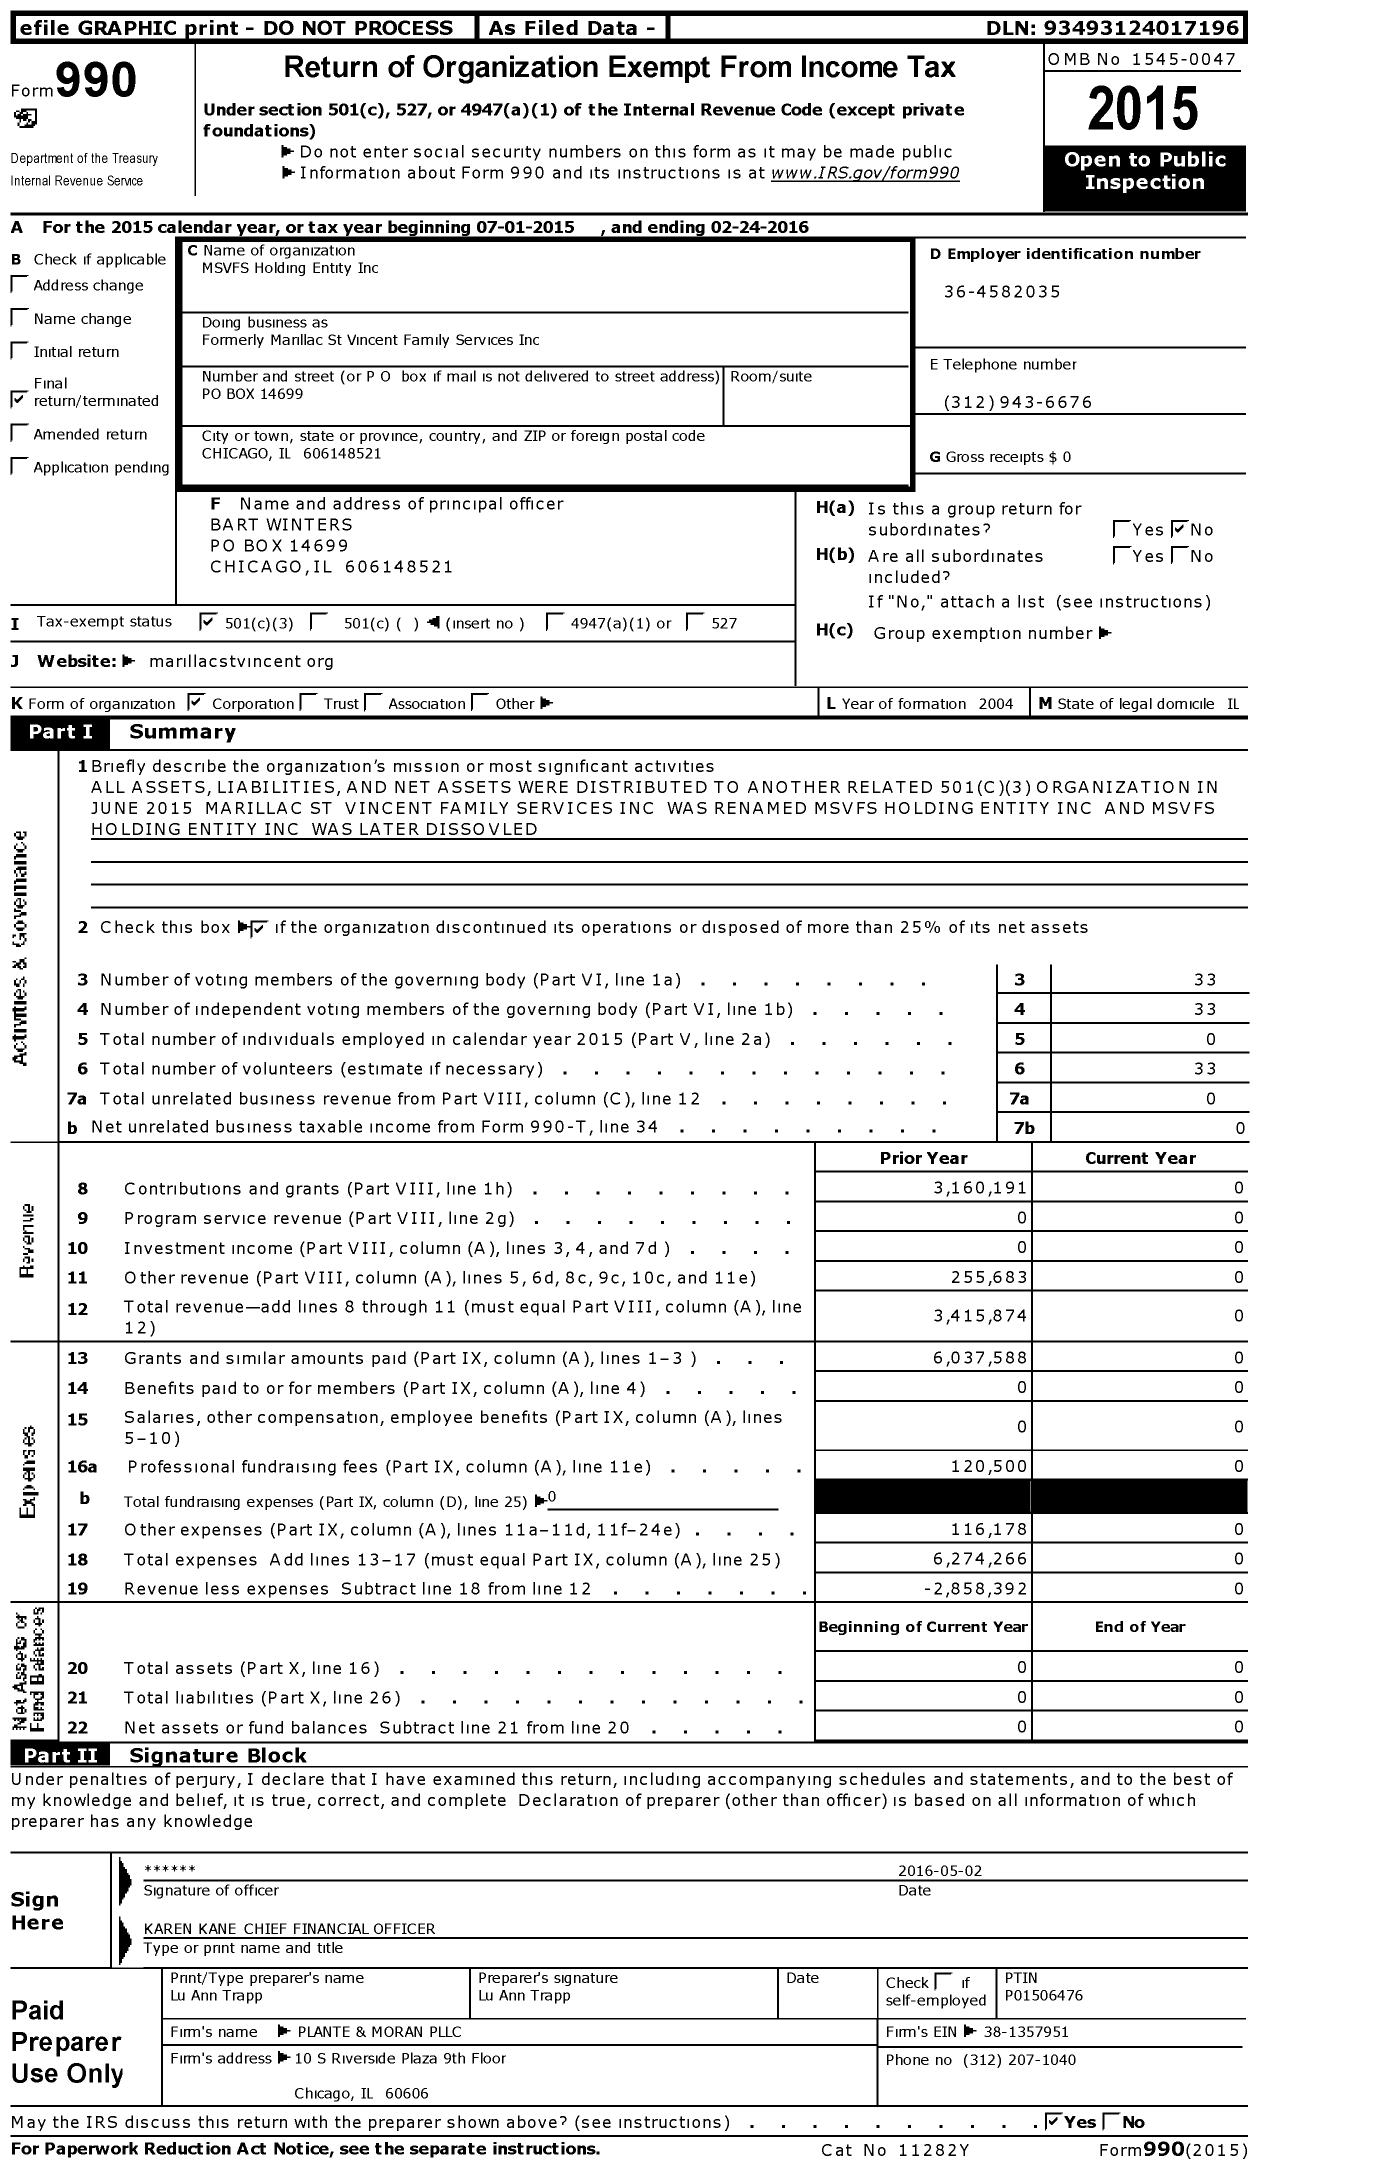 Image of first page of 2015 Form 990 for MSVFS Holding Entity